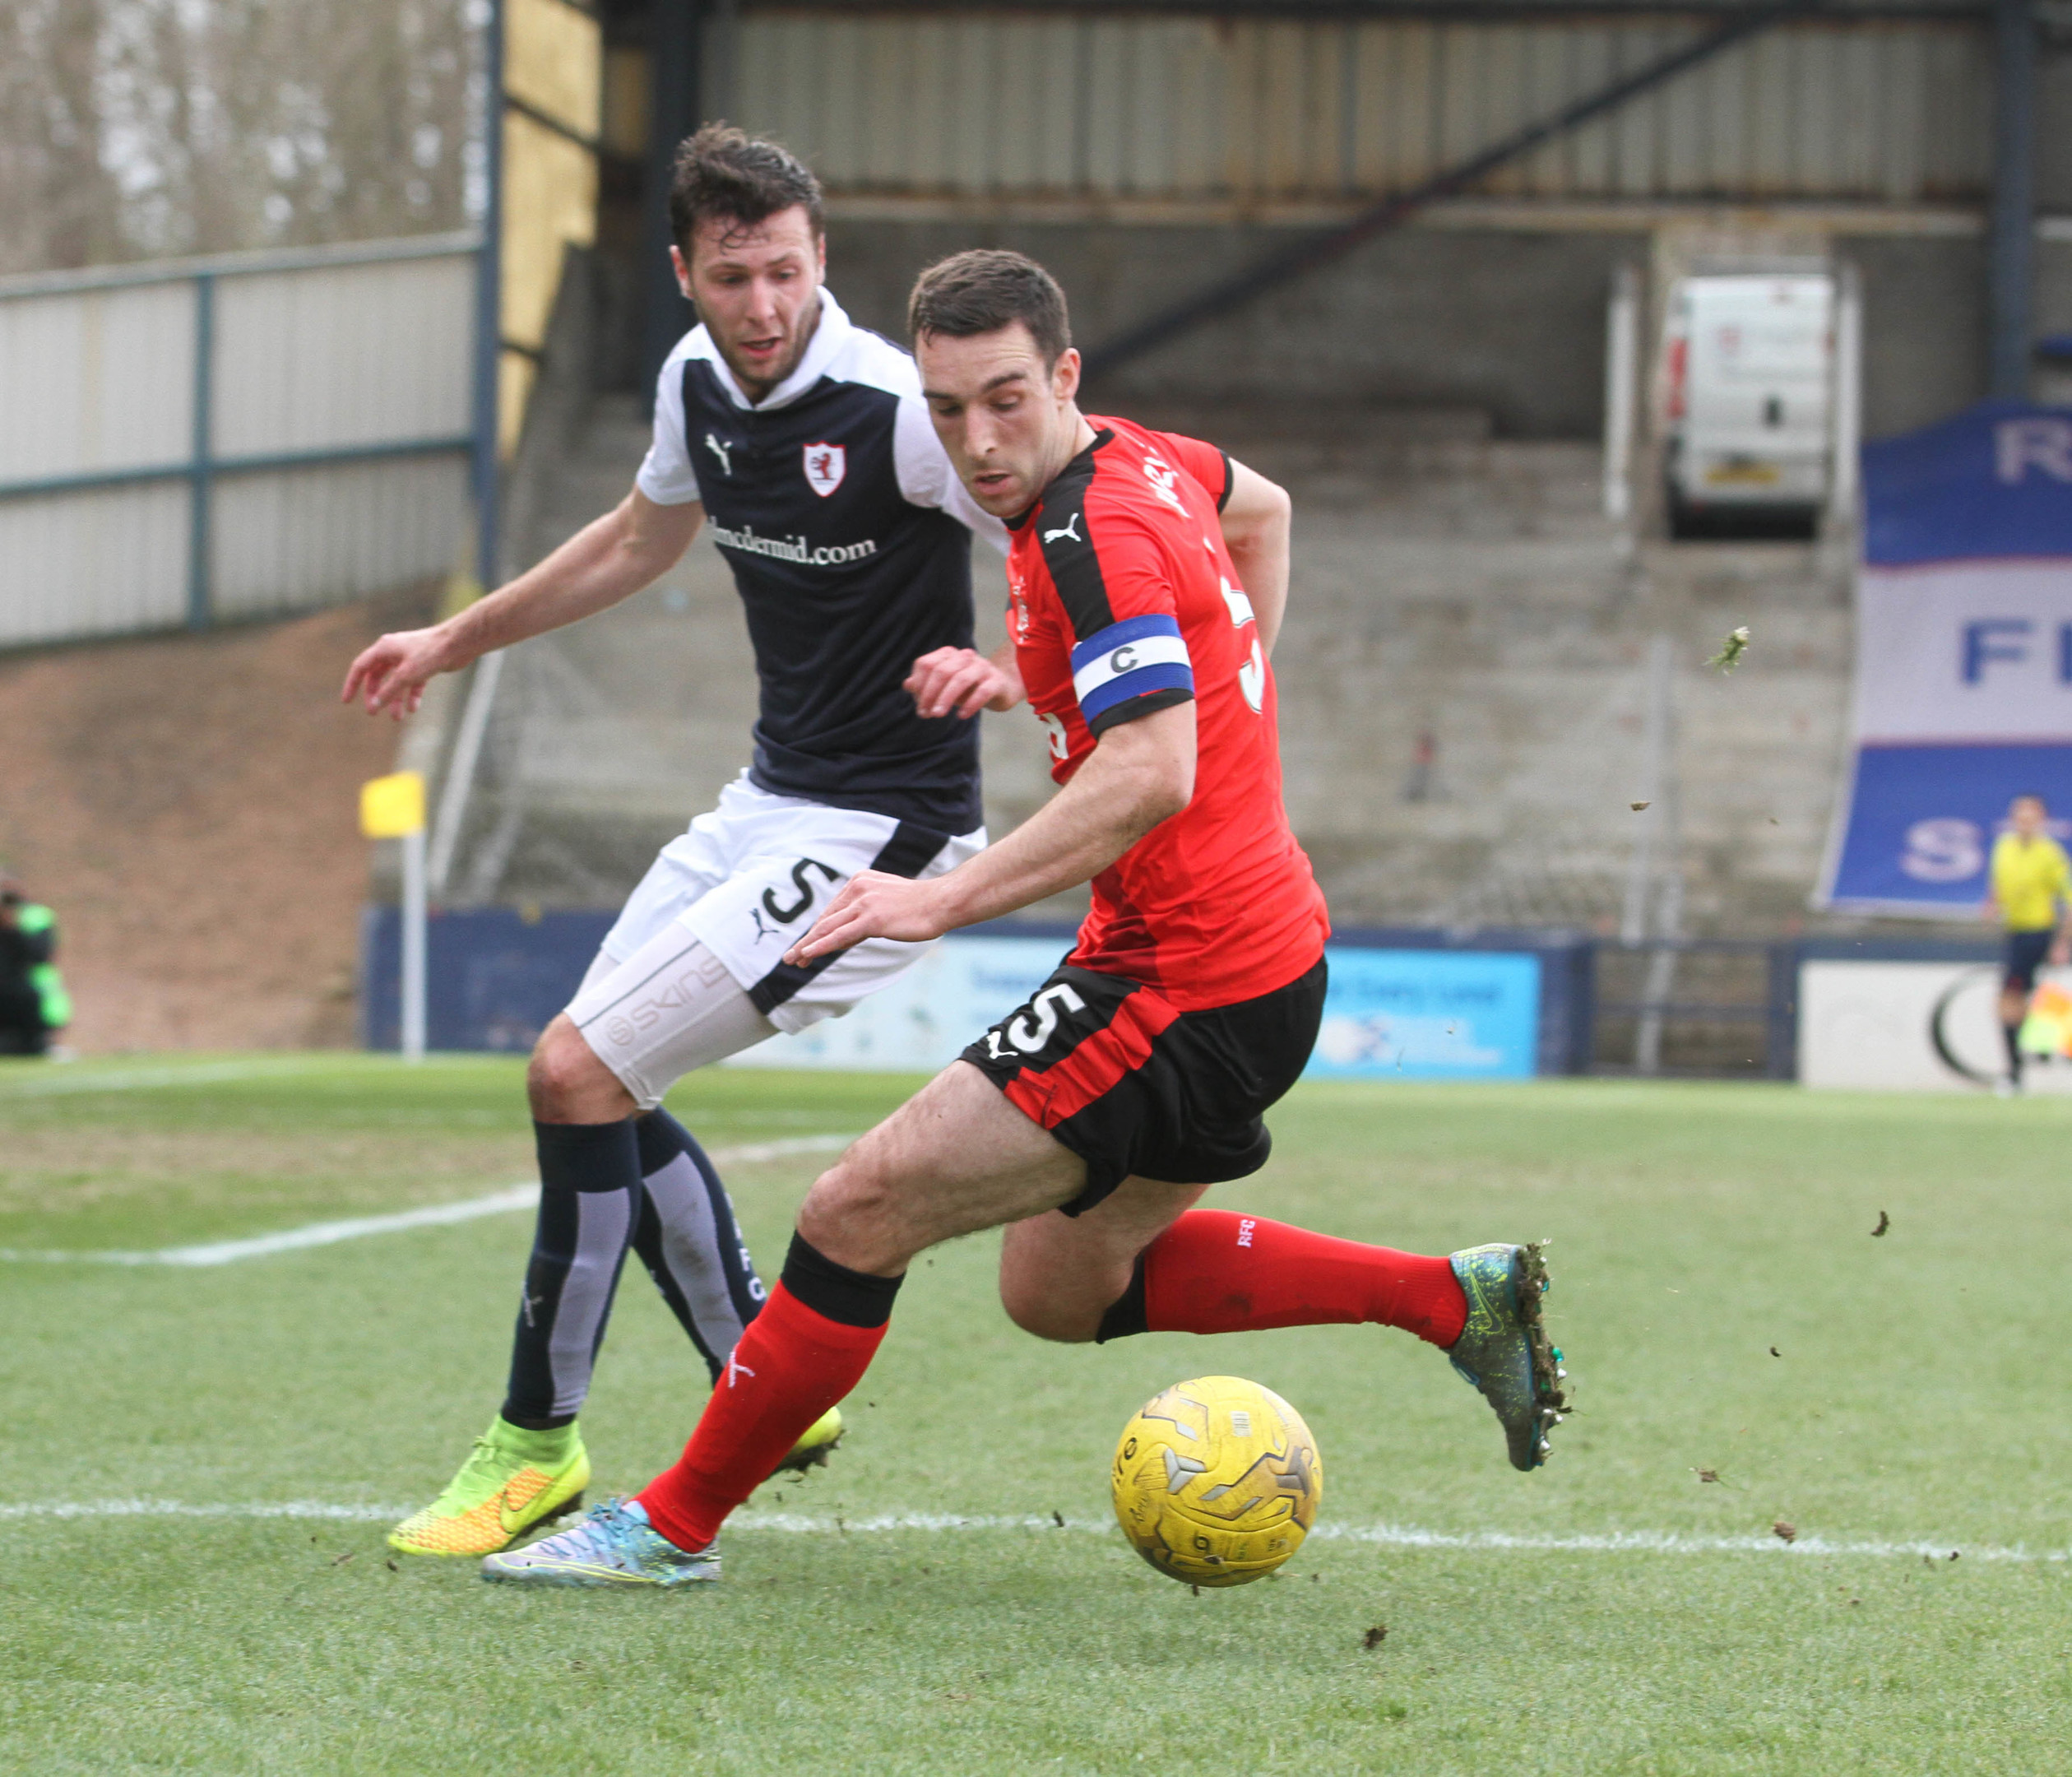 Lee Wallace and Lewis Toshney during the Ladbrokes Championship game at Starks Park (C Austin/ DcThomson)